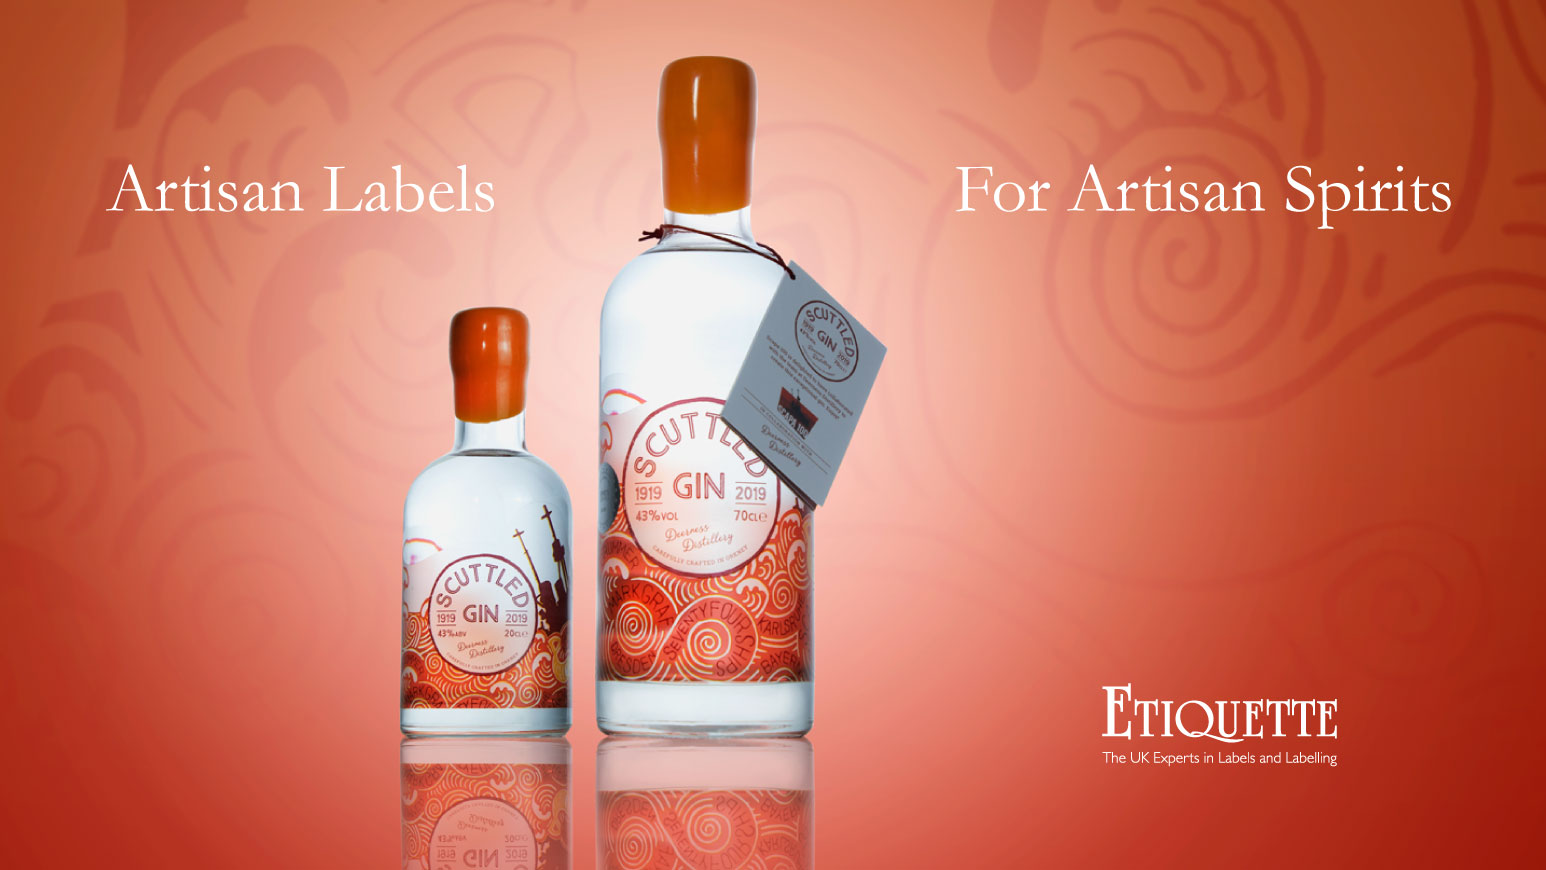 Scuttled Gin Labels - clear synthetic material with matt finish, produced by Etiquette Labels, UK Experts in Labels and Labelling